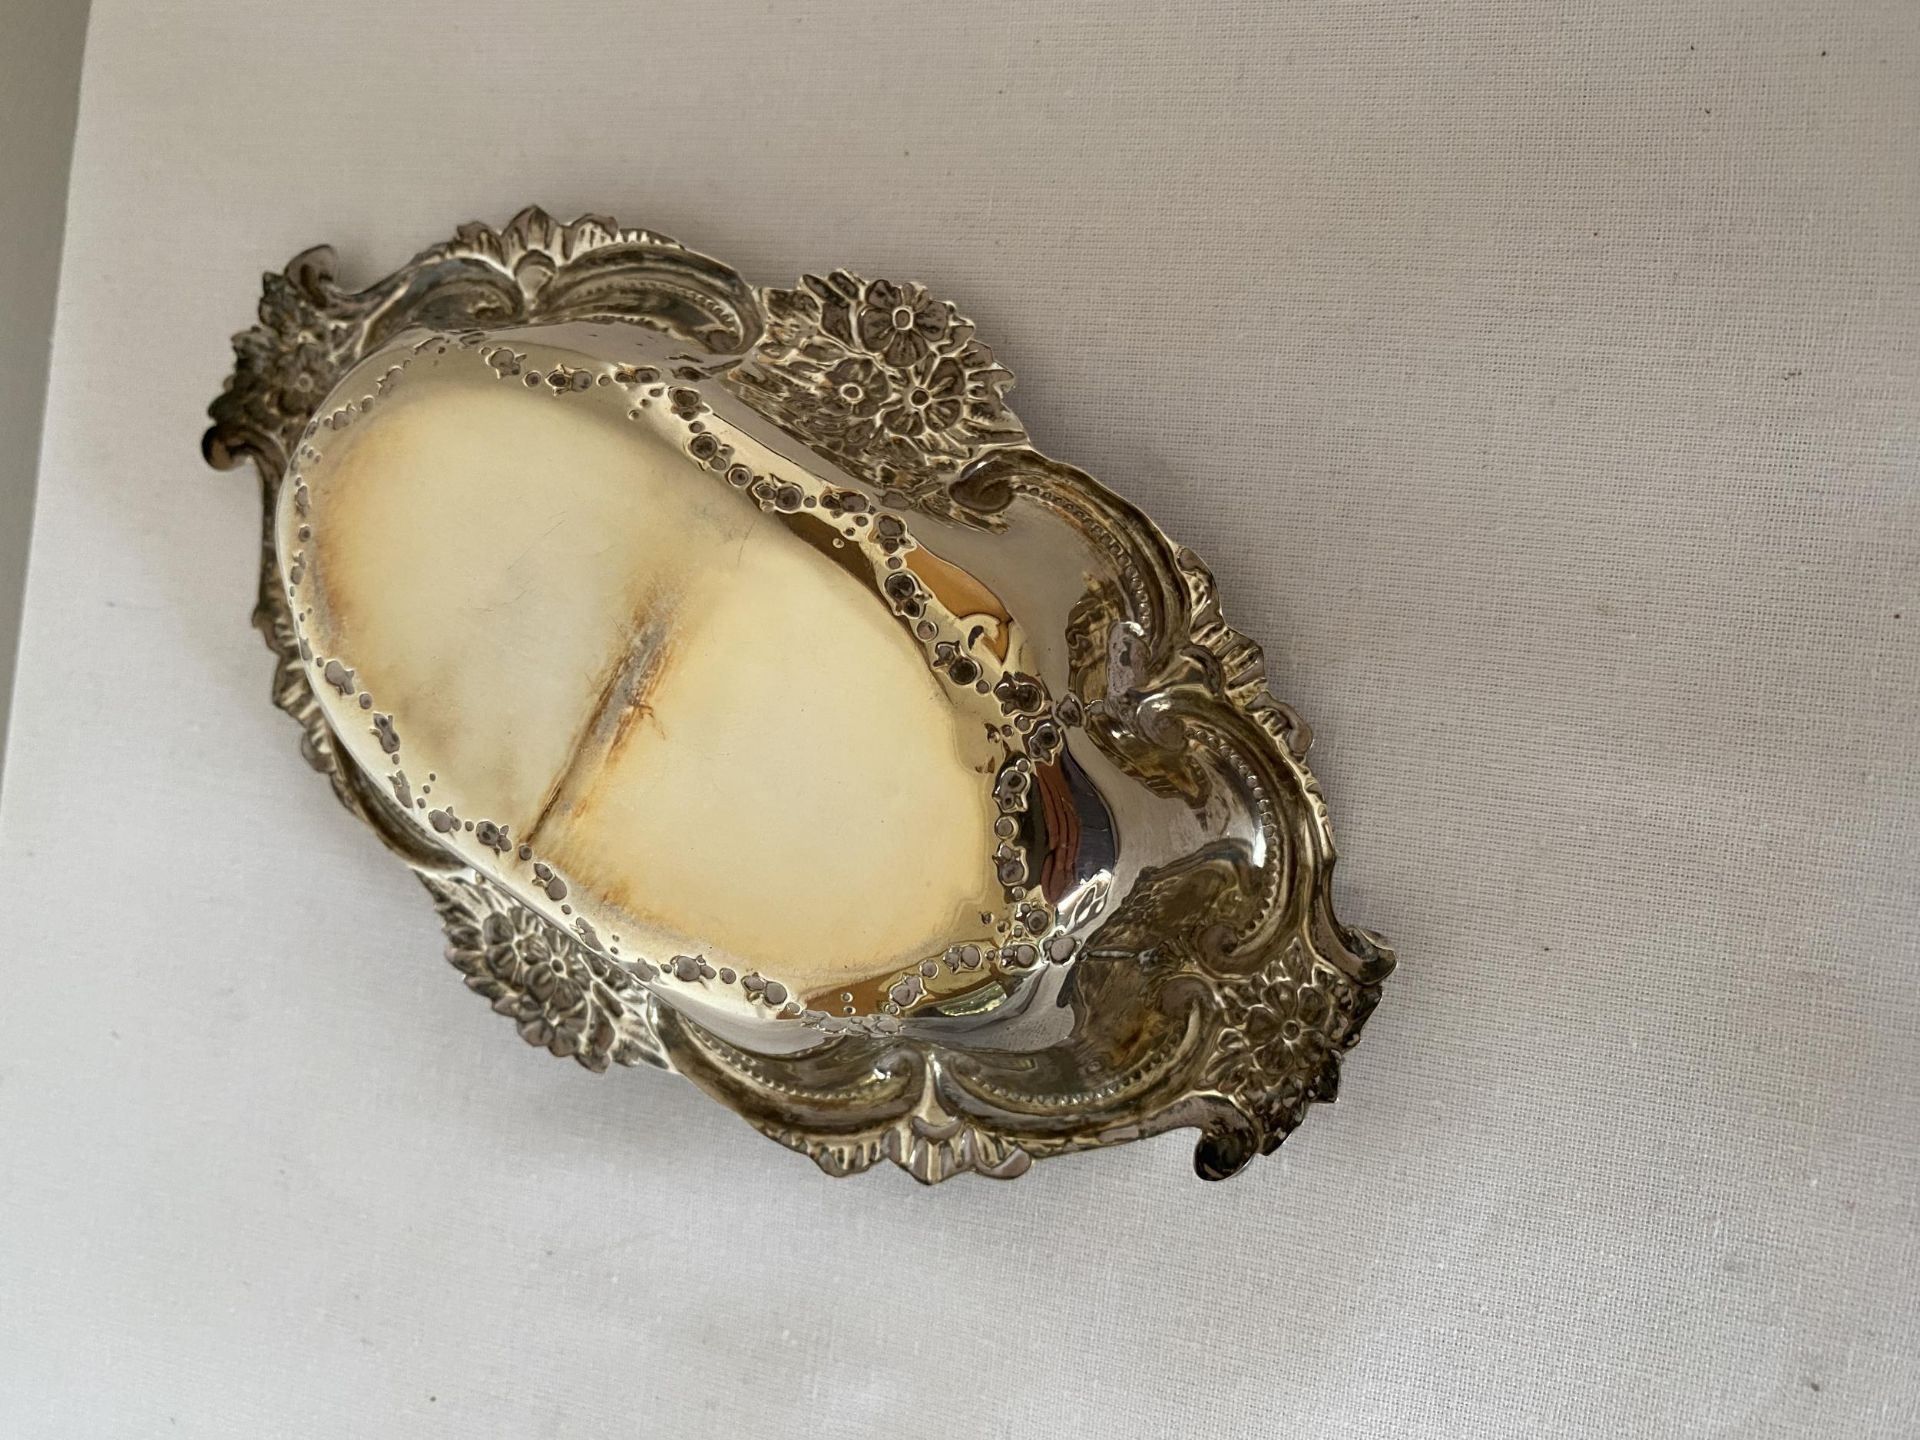 A 1901 HALLMARKED CHESTER SILVER DISH, MAKER GEORGE NATHAN & RIDLEY HAYES, GROSS WEIGHT 27 GRAMS - Image 11 of 21